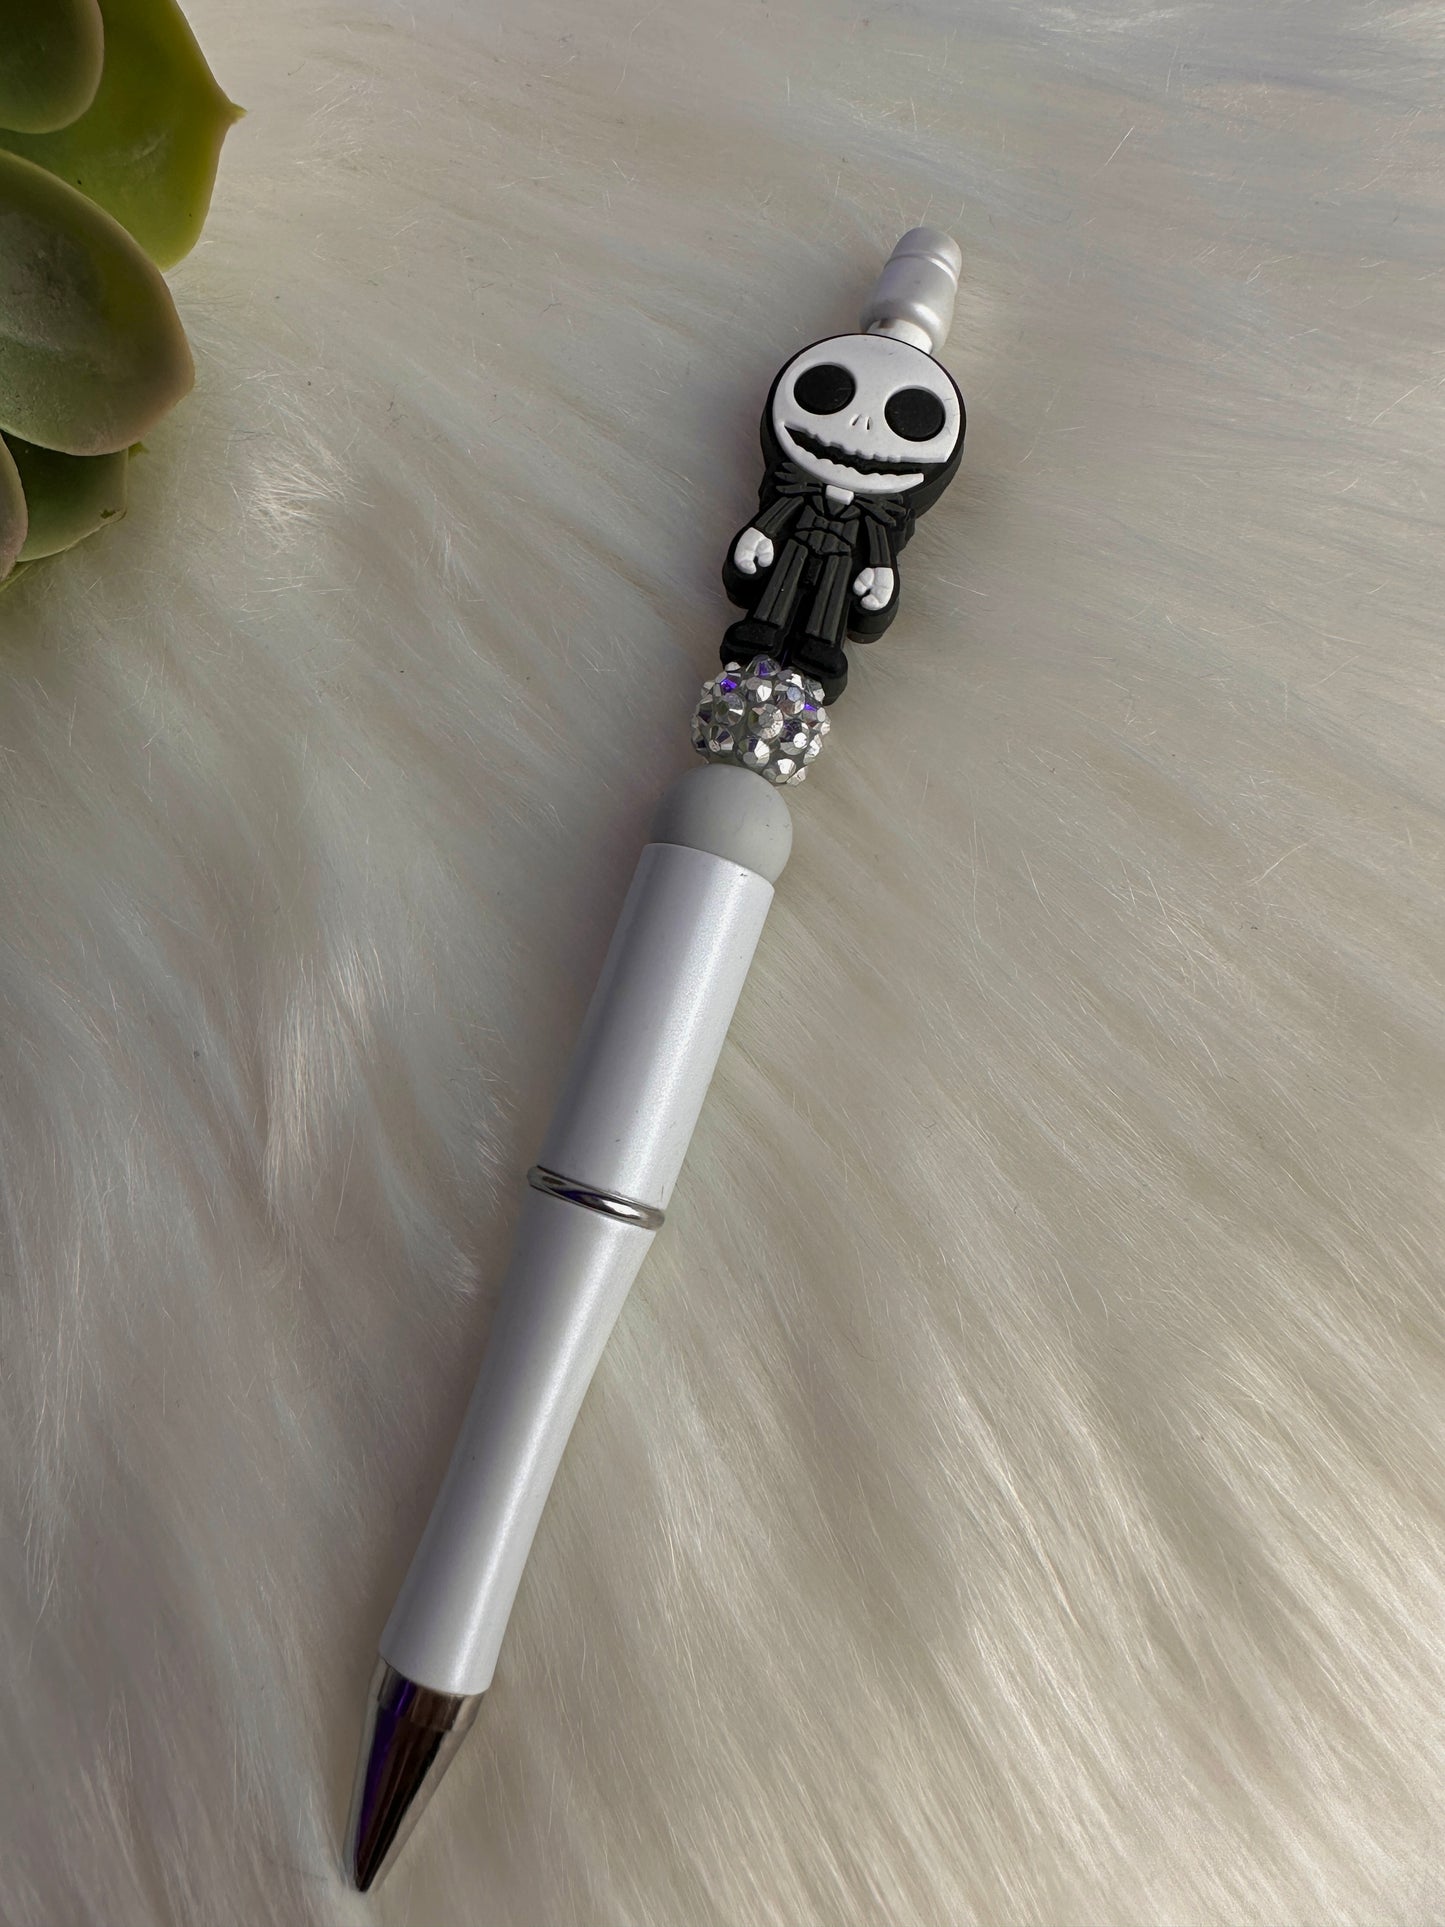 The Nightmare Before Christmas Pens